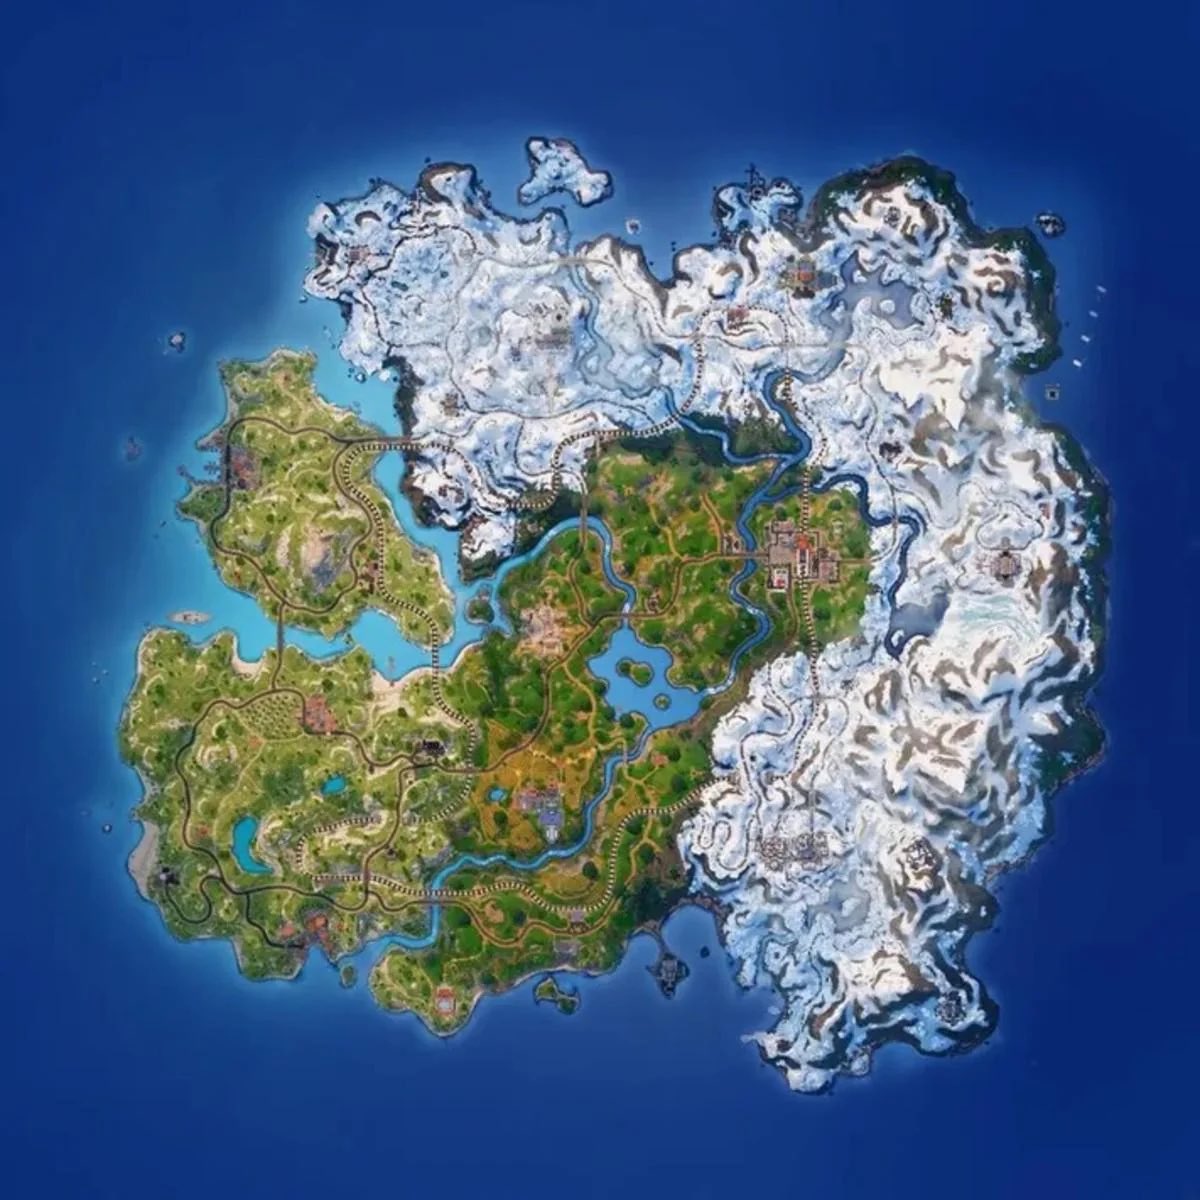 What do you guys think is the worst Fortnite map of all time?

Imo Chapter 5 is it for me but lemme hear what y'all think 💭

Tags 🏷️ 
#Fortnite
#FortniteMap
#FortniteChapter5
#FortniteBR
#FortniteMedallions